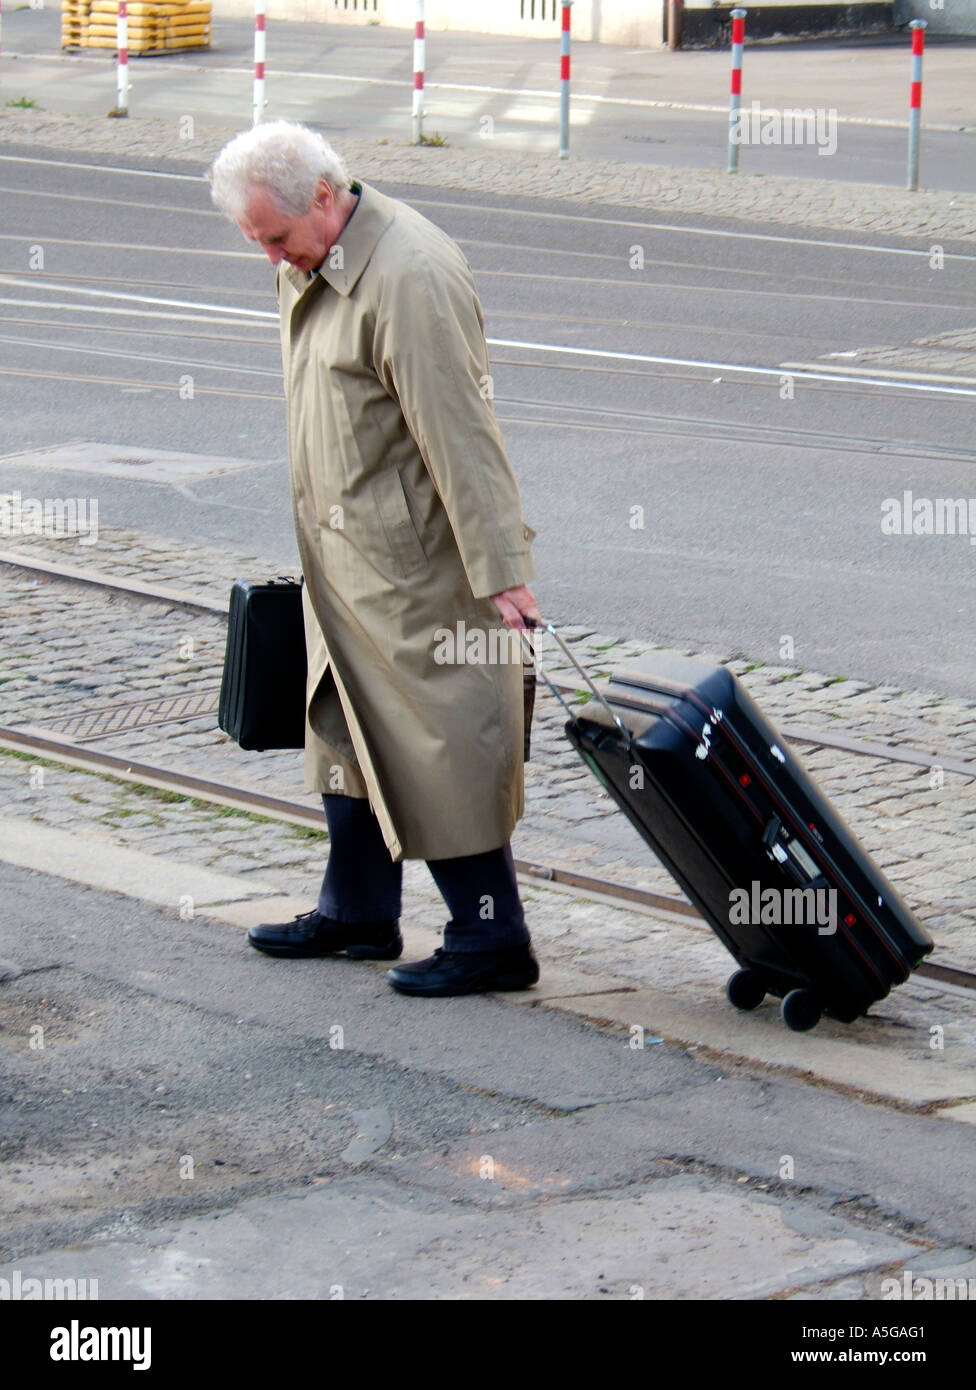 Man with suitcase Banque D'Images